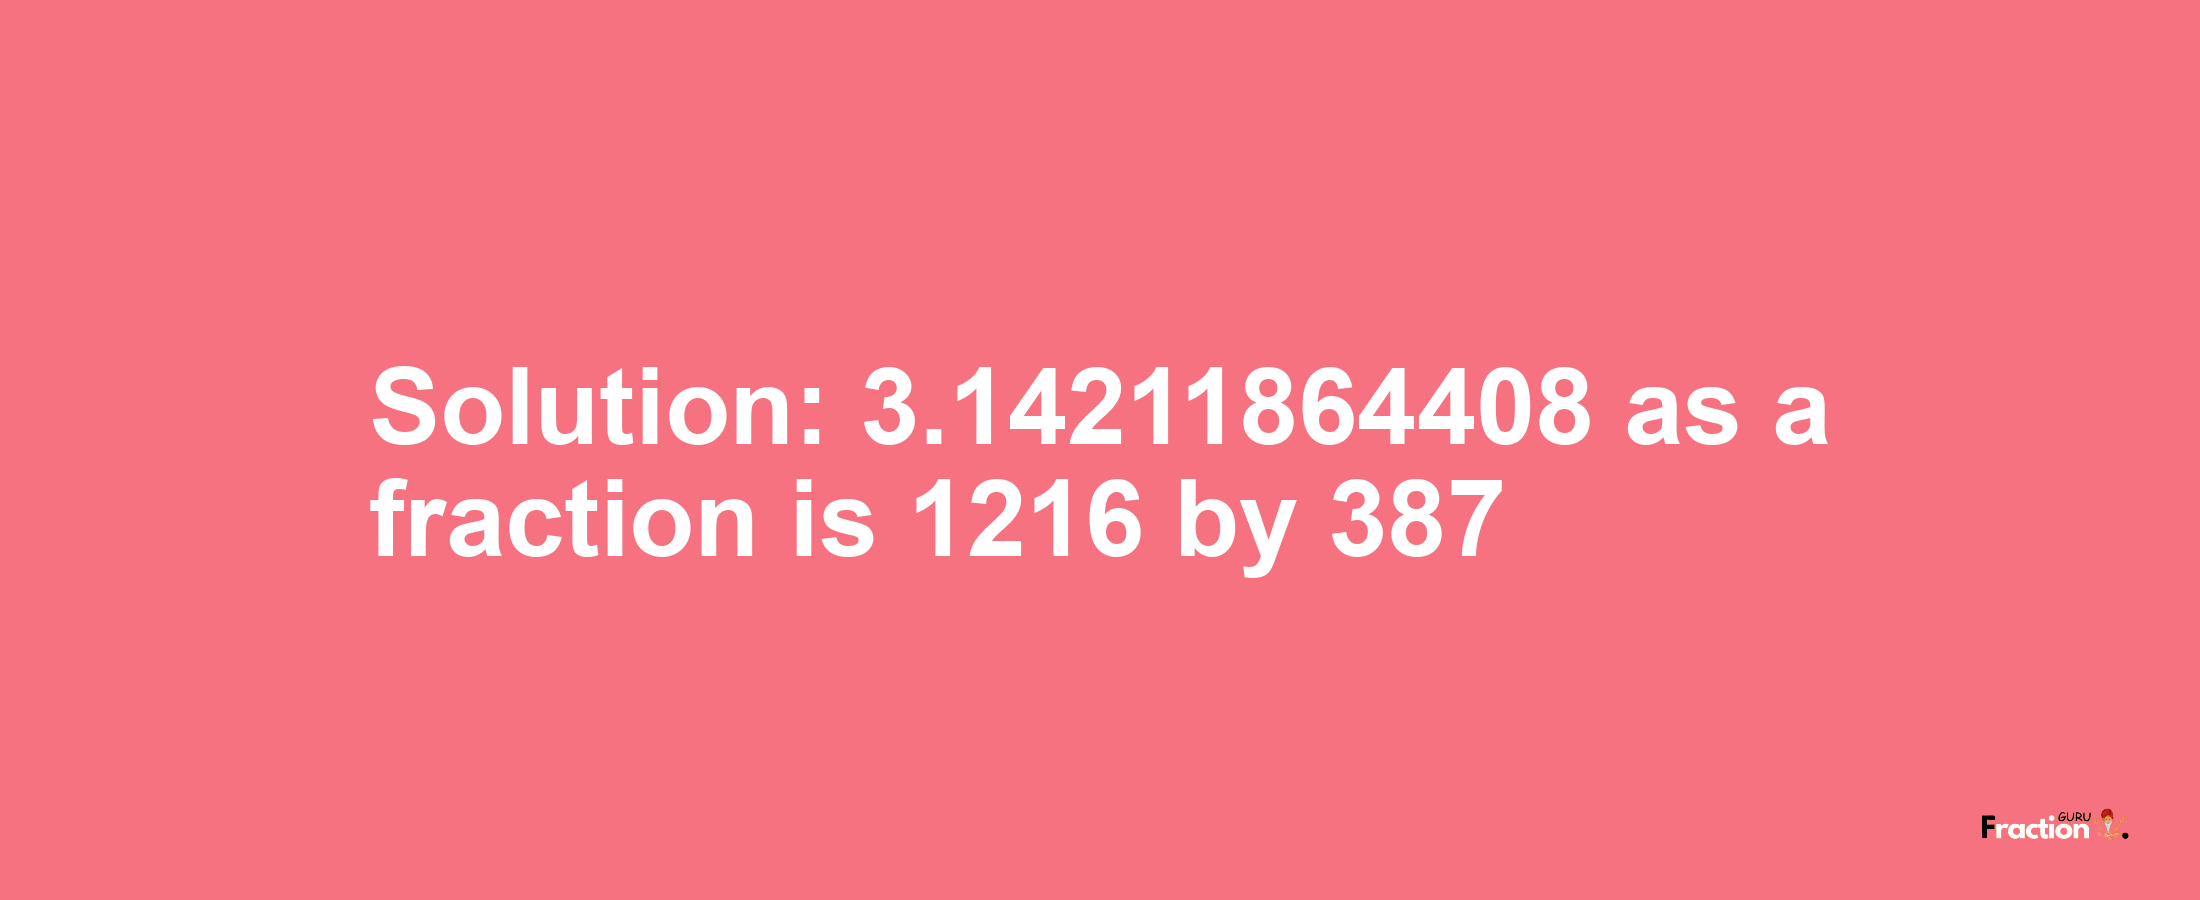 Solution:3.14211864408 as a fraction is 1216/387